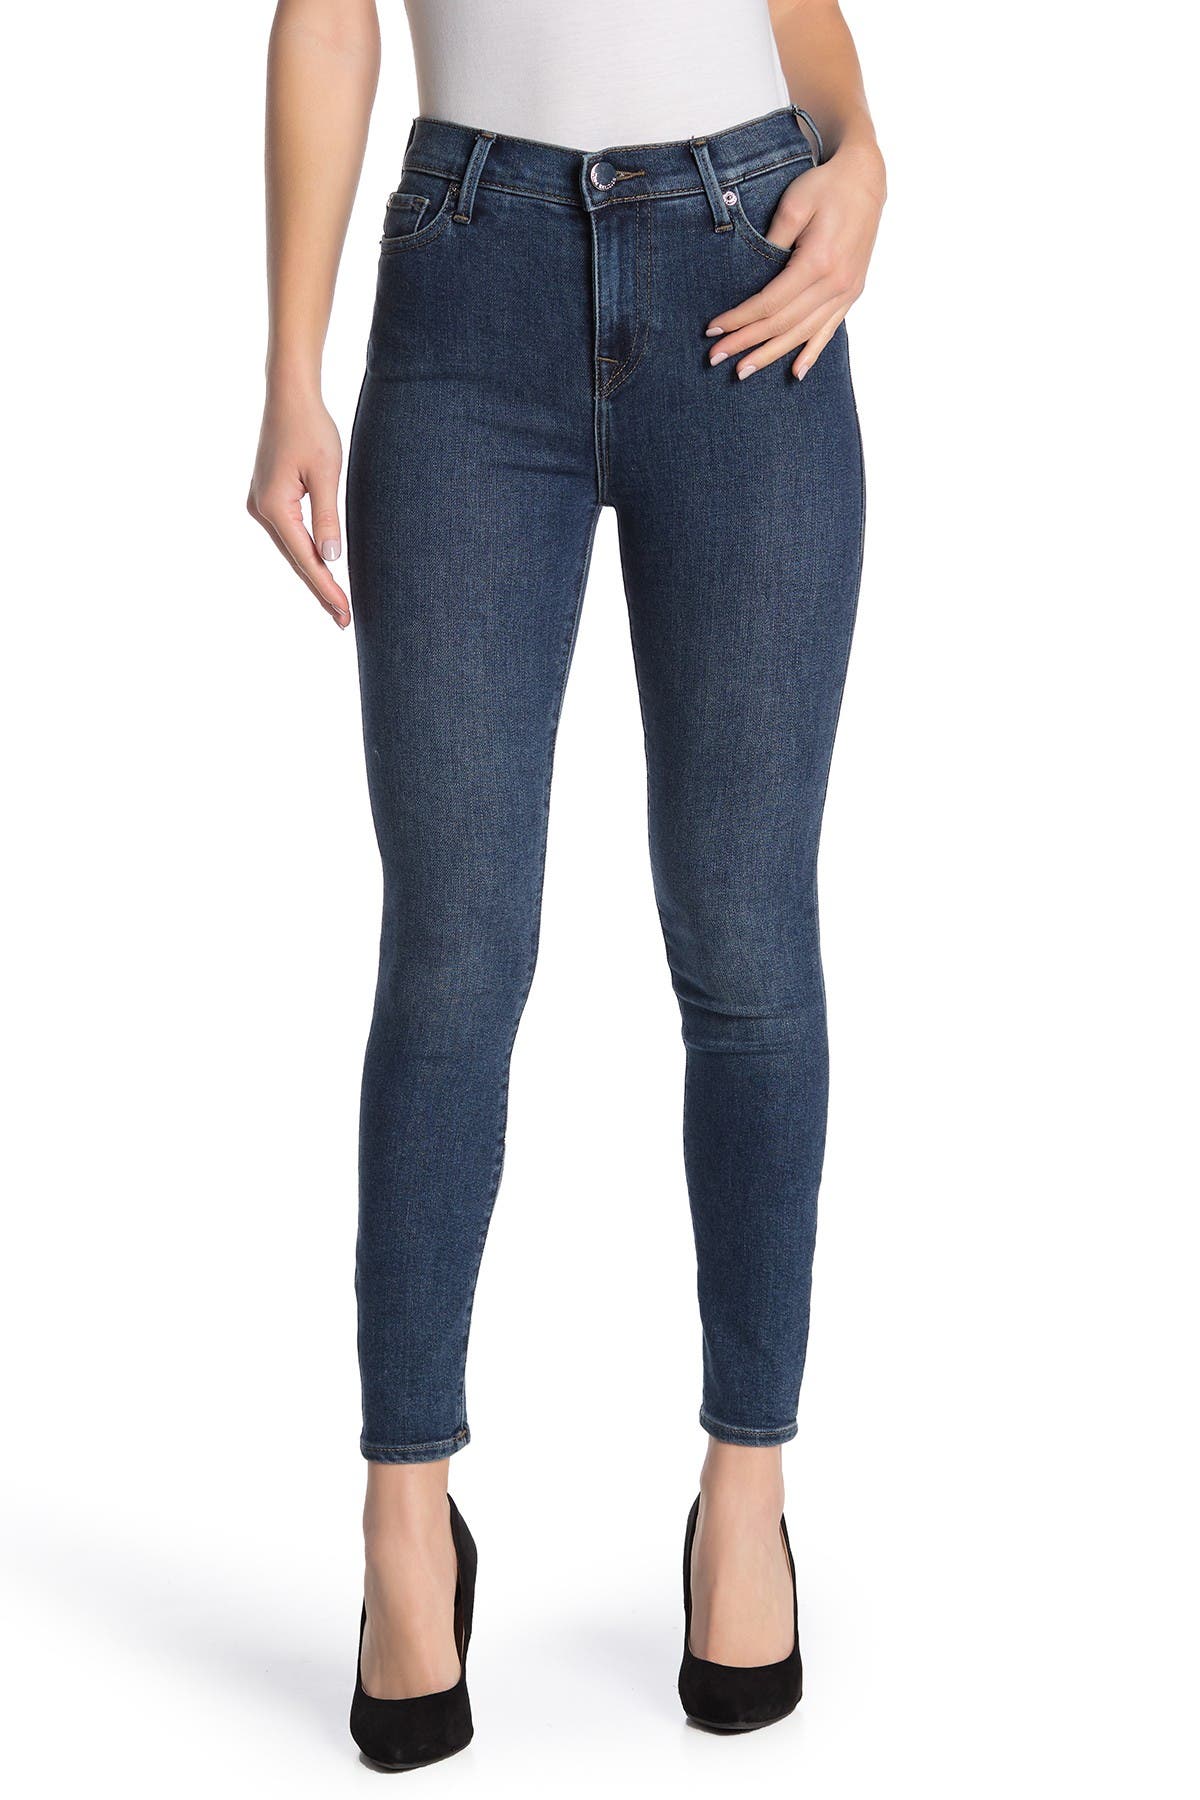 true religion high waisted jeans